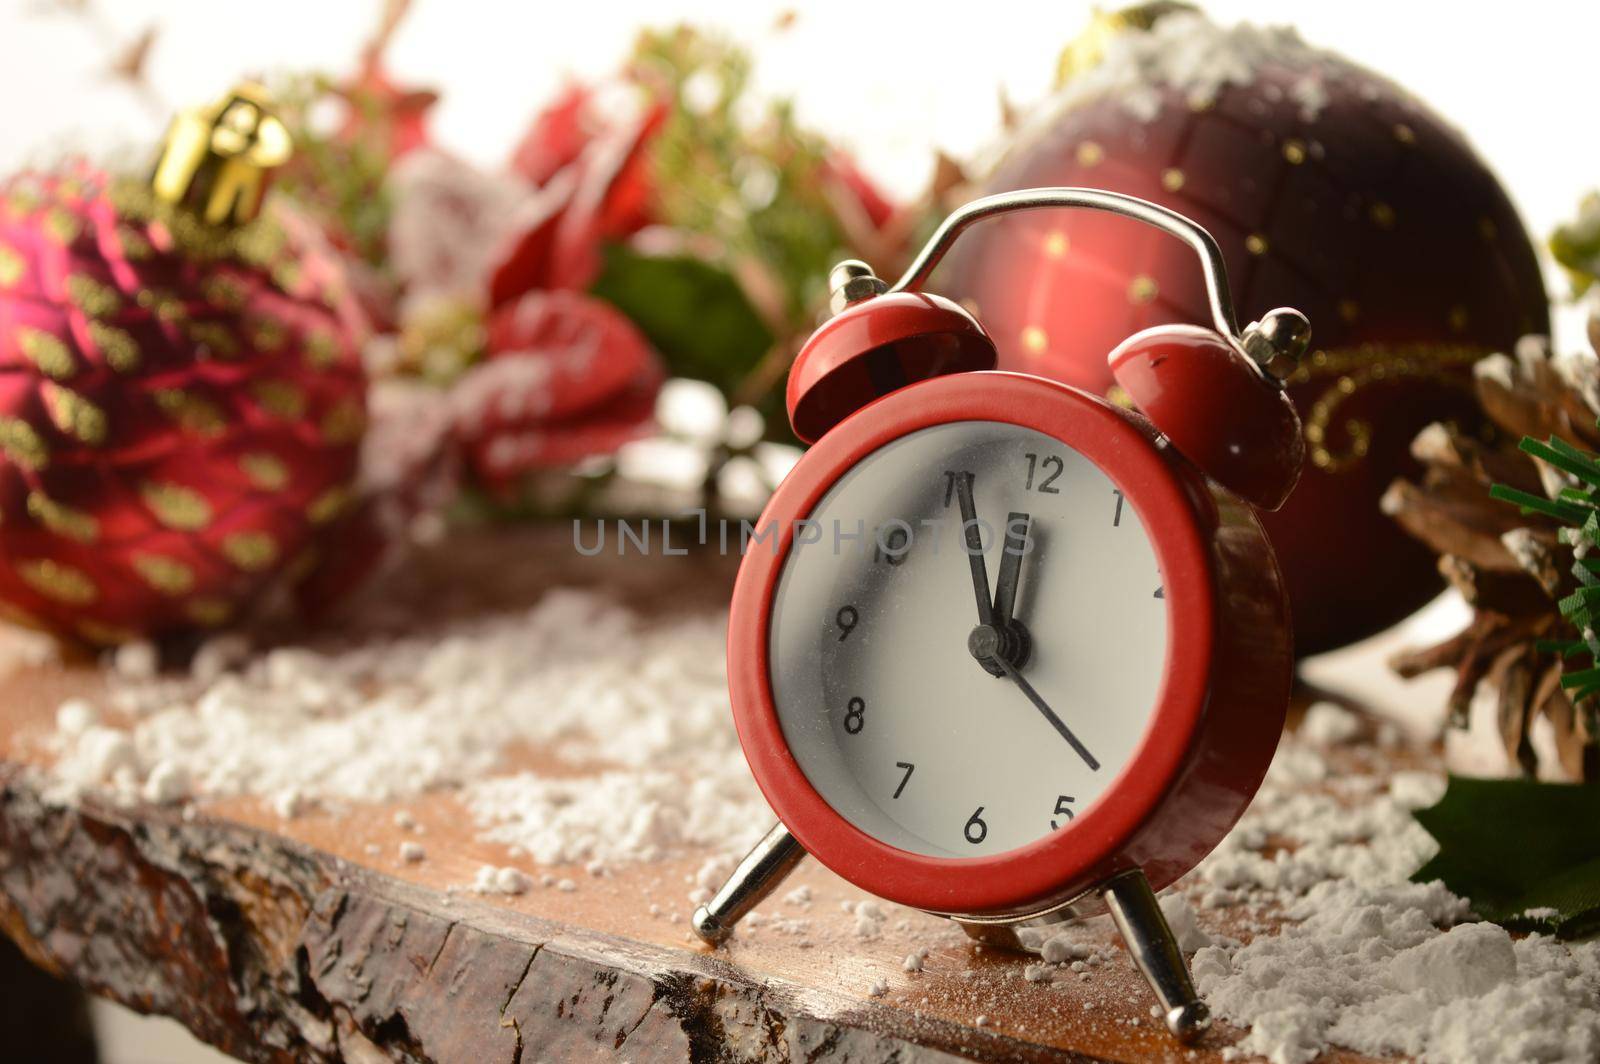 The countdown to midnight on New Years Eve is the focus used here with a red alarm clock and festive holiday setting.